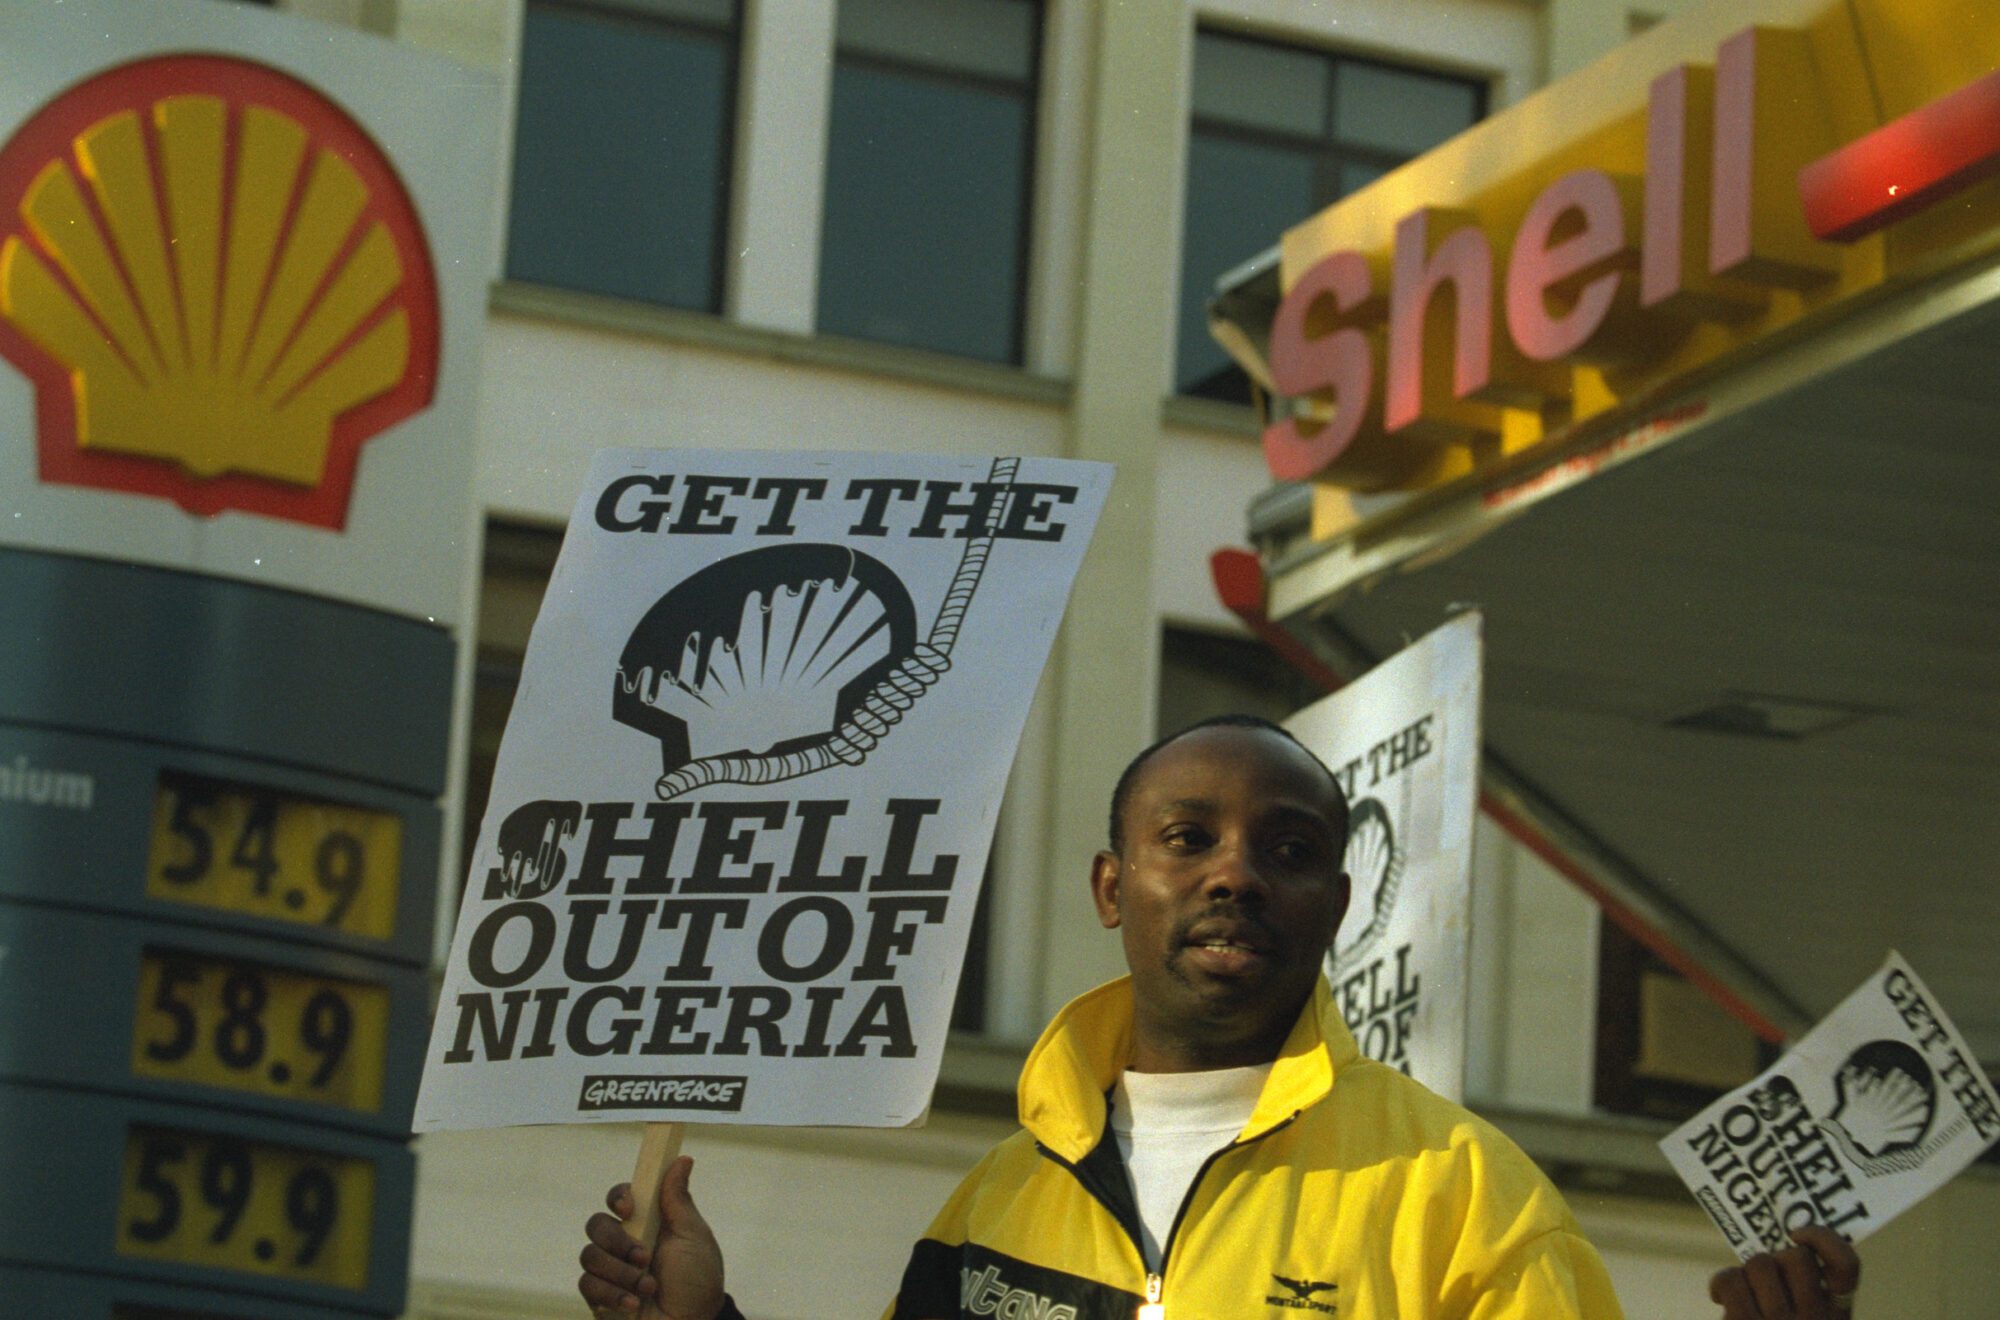 A Black man stands in front of a Shell petrol station holding a placard that reads 'Get the Shell out of Nigeria'. More identical placards are visible over his shoulder.